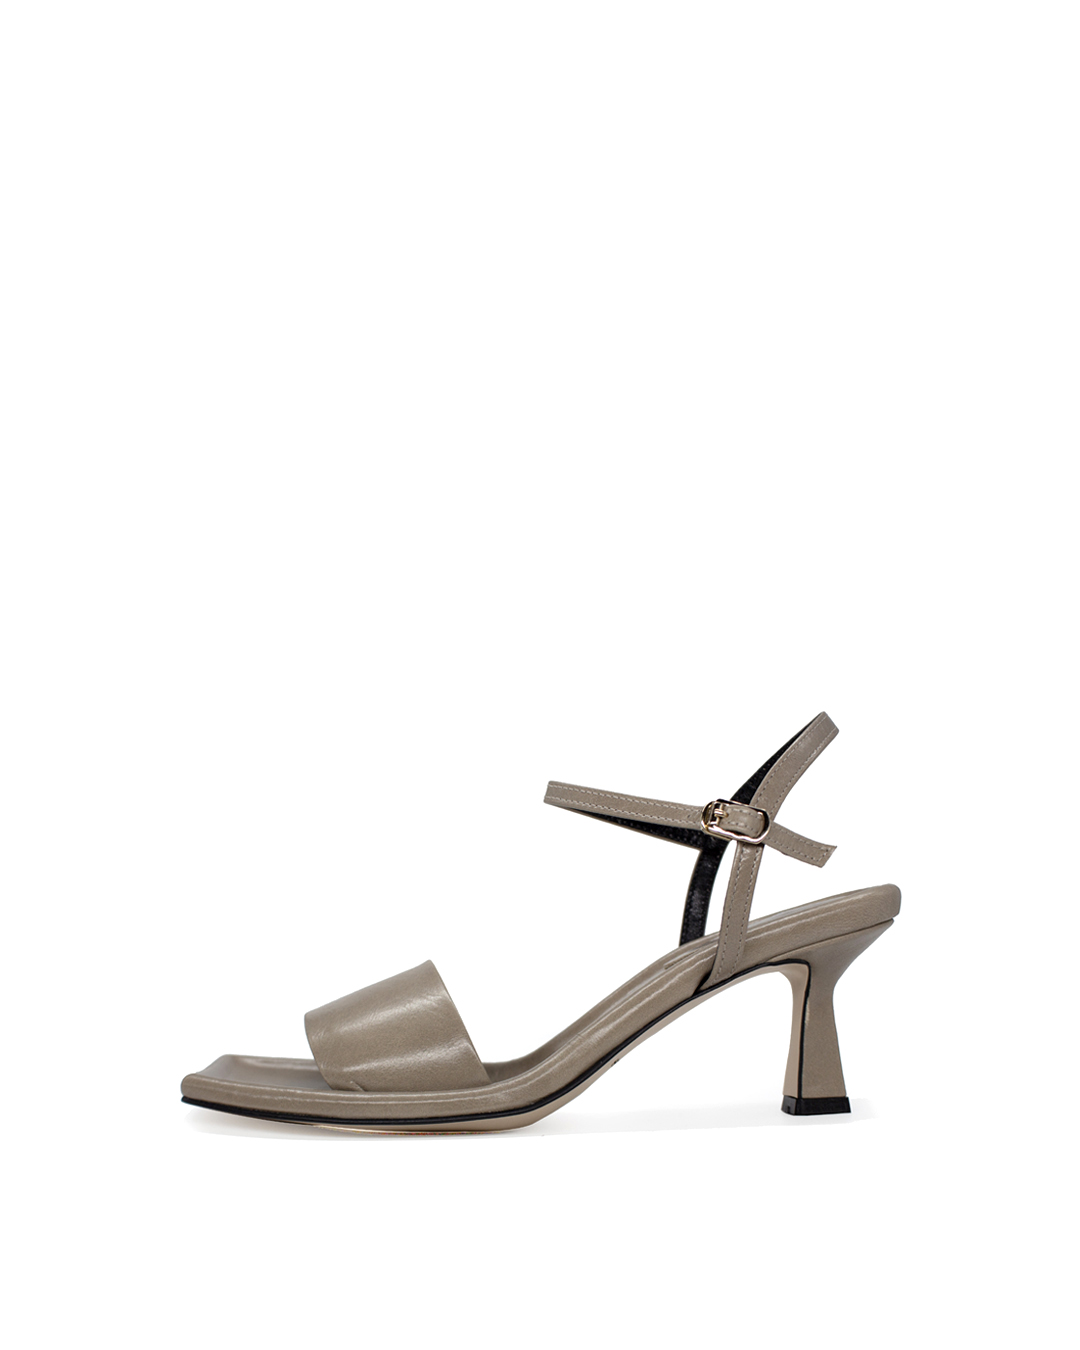 TOTE Sandals - TAUPE